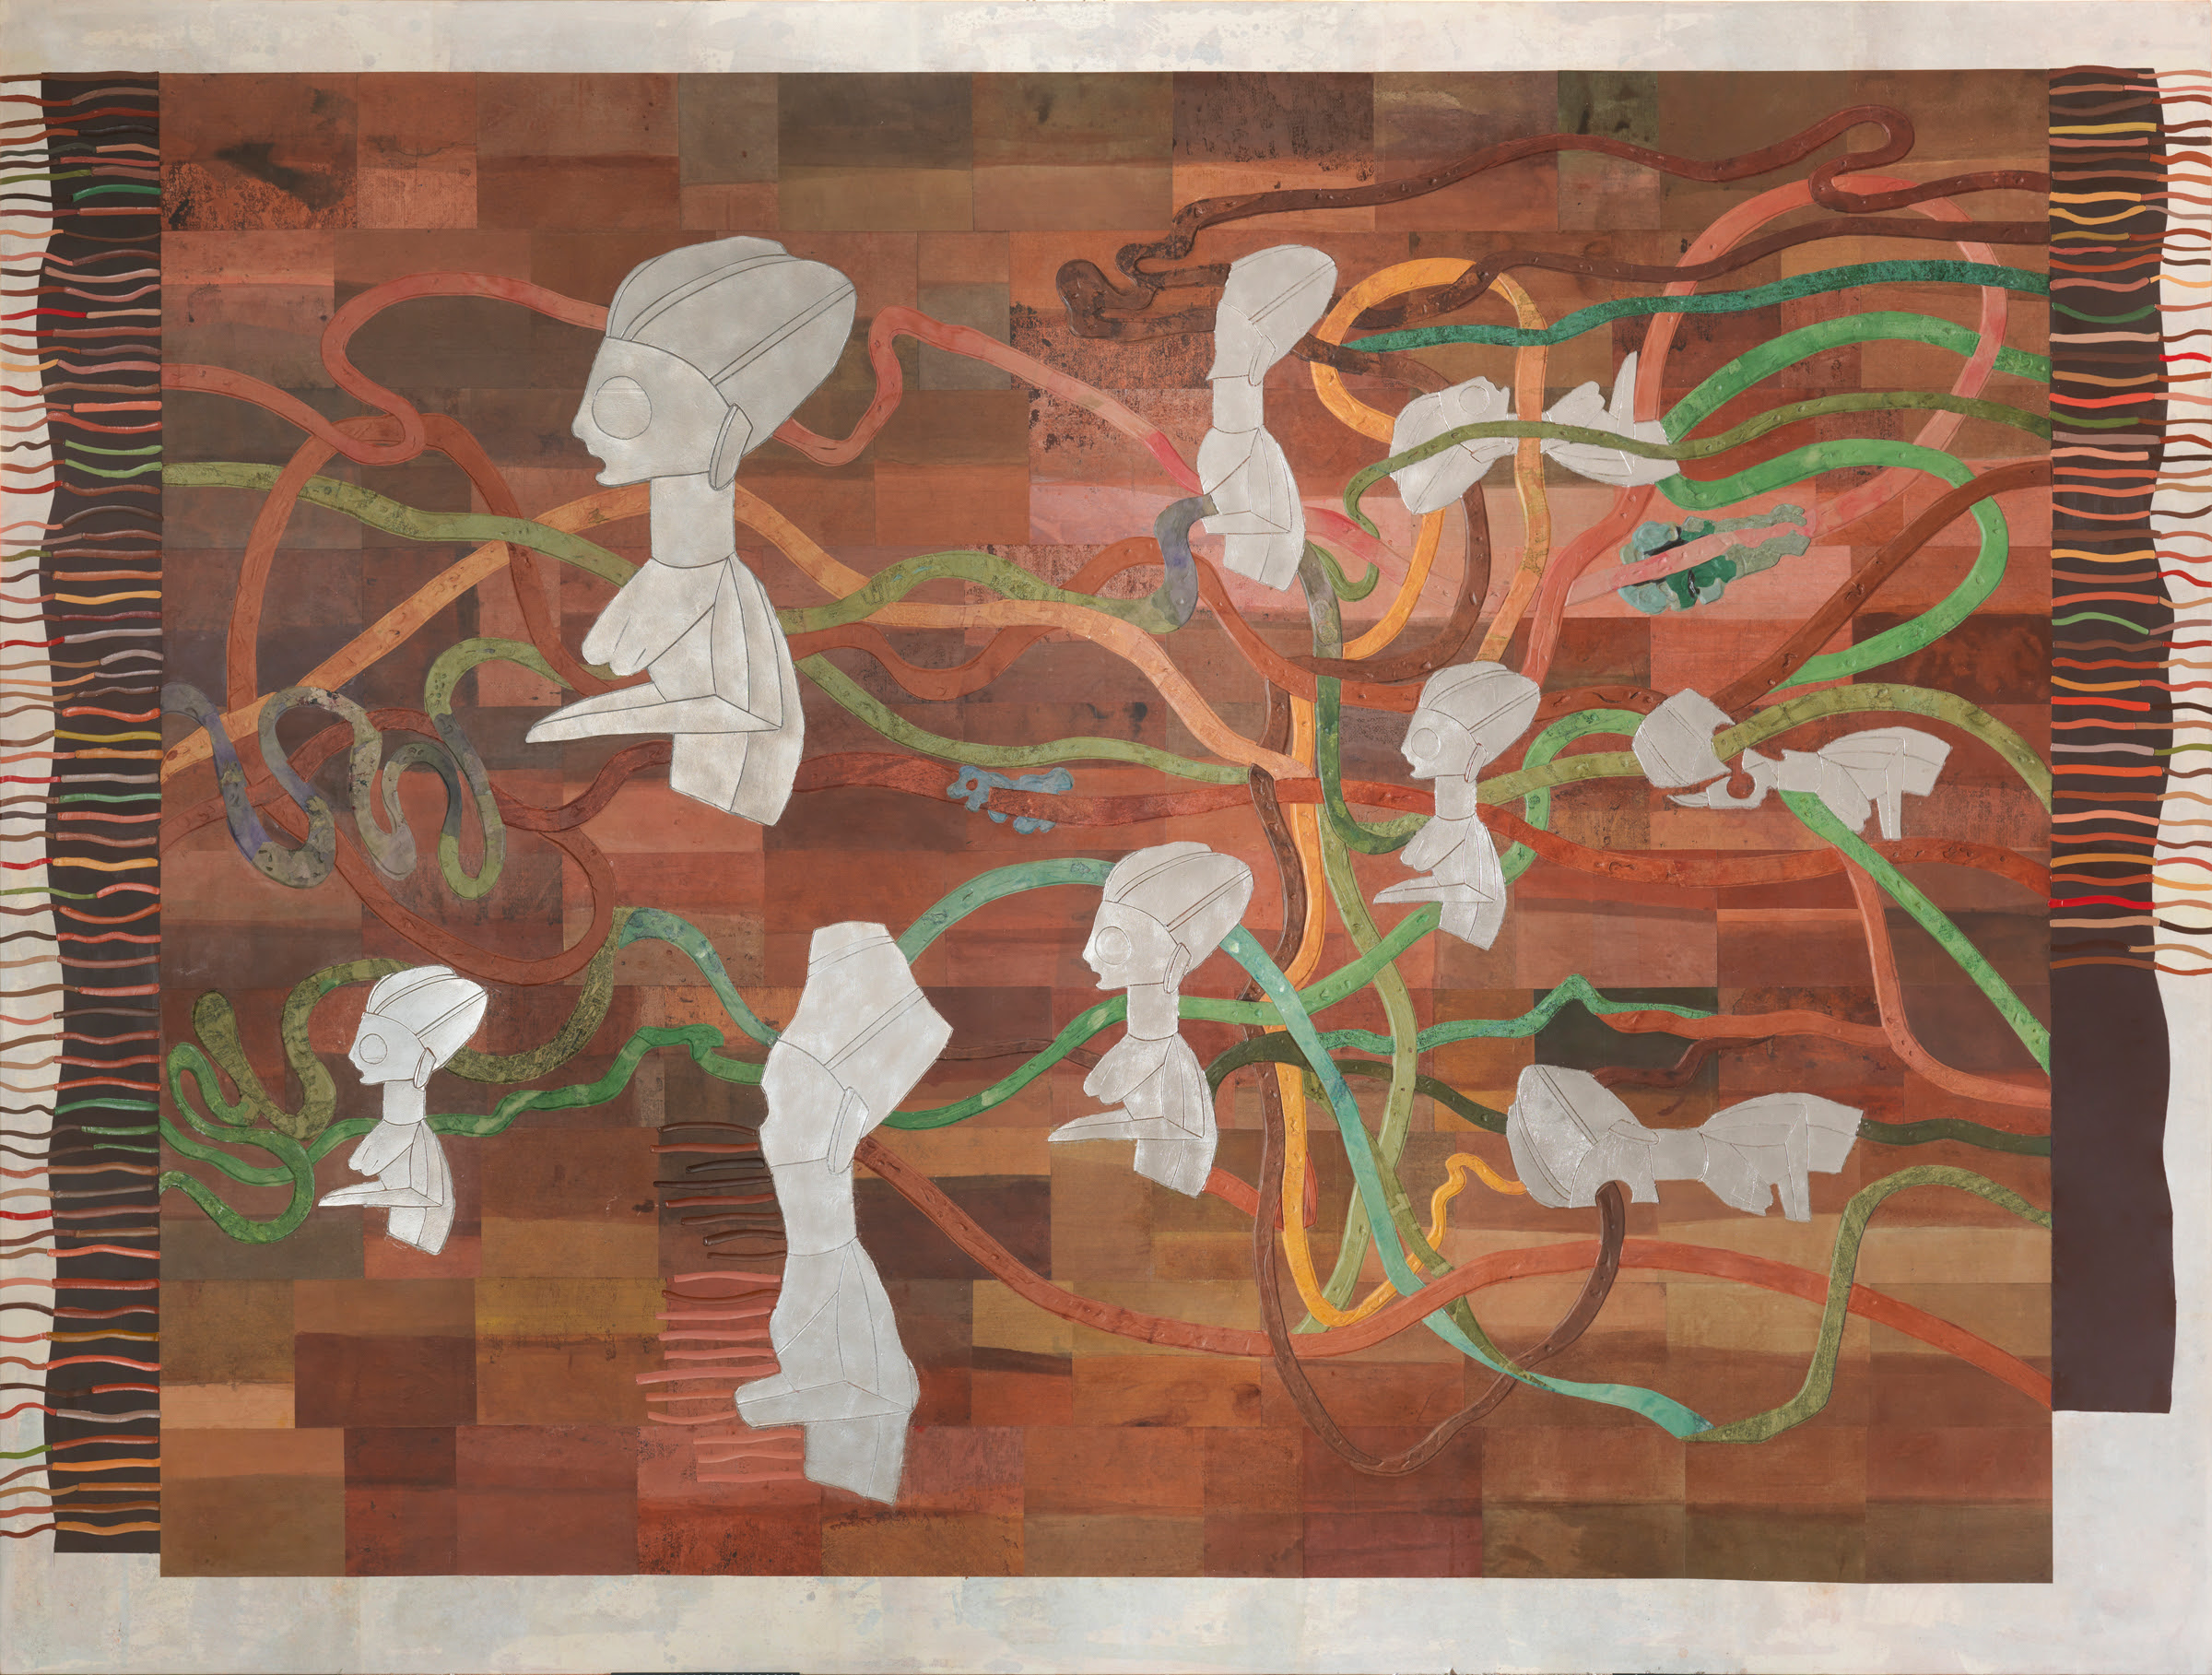 Ellen Gallagher, Ecstatic Draught of Fishes, 2022. Oil, pigment, palladium leaf, and paper on canvas, 89 3/4 × 118 1/8 in. (248 × 300 cm). Collection of the artist; courtesy the artist; Gagosian, New York; and Hauser & Wirth, New York